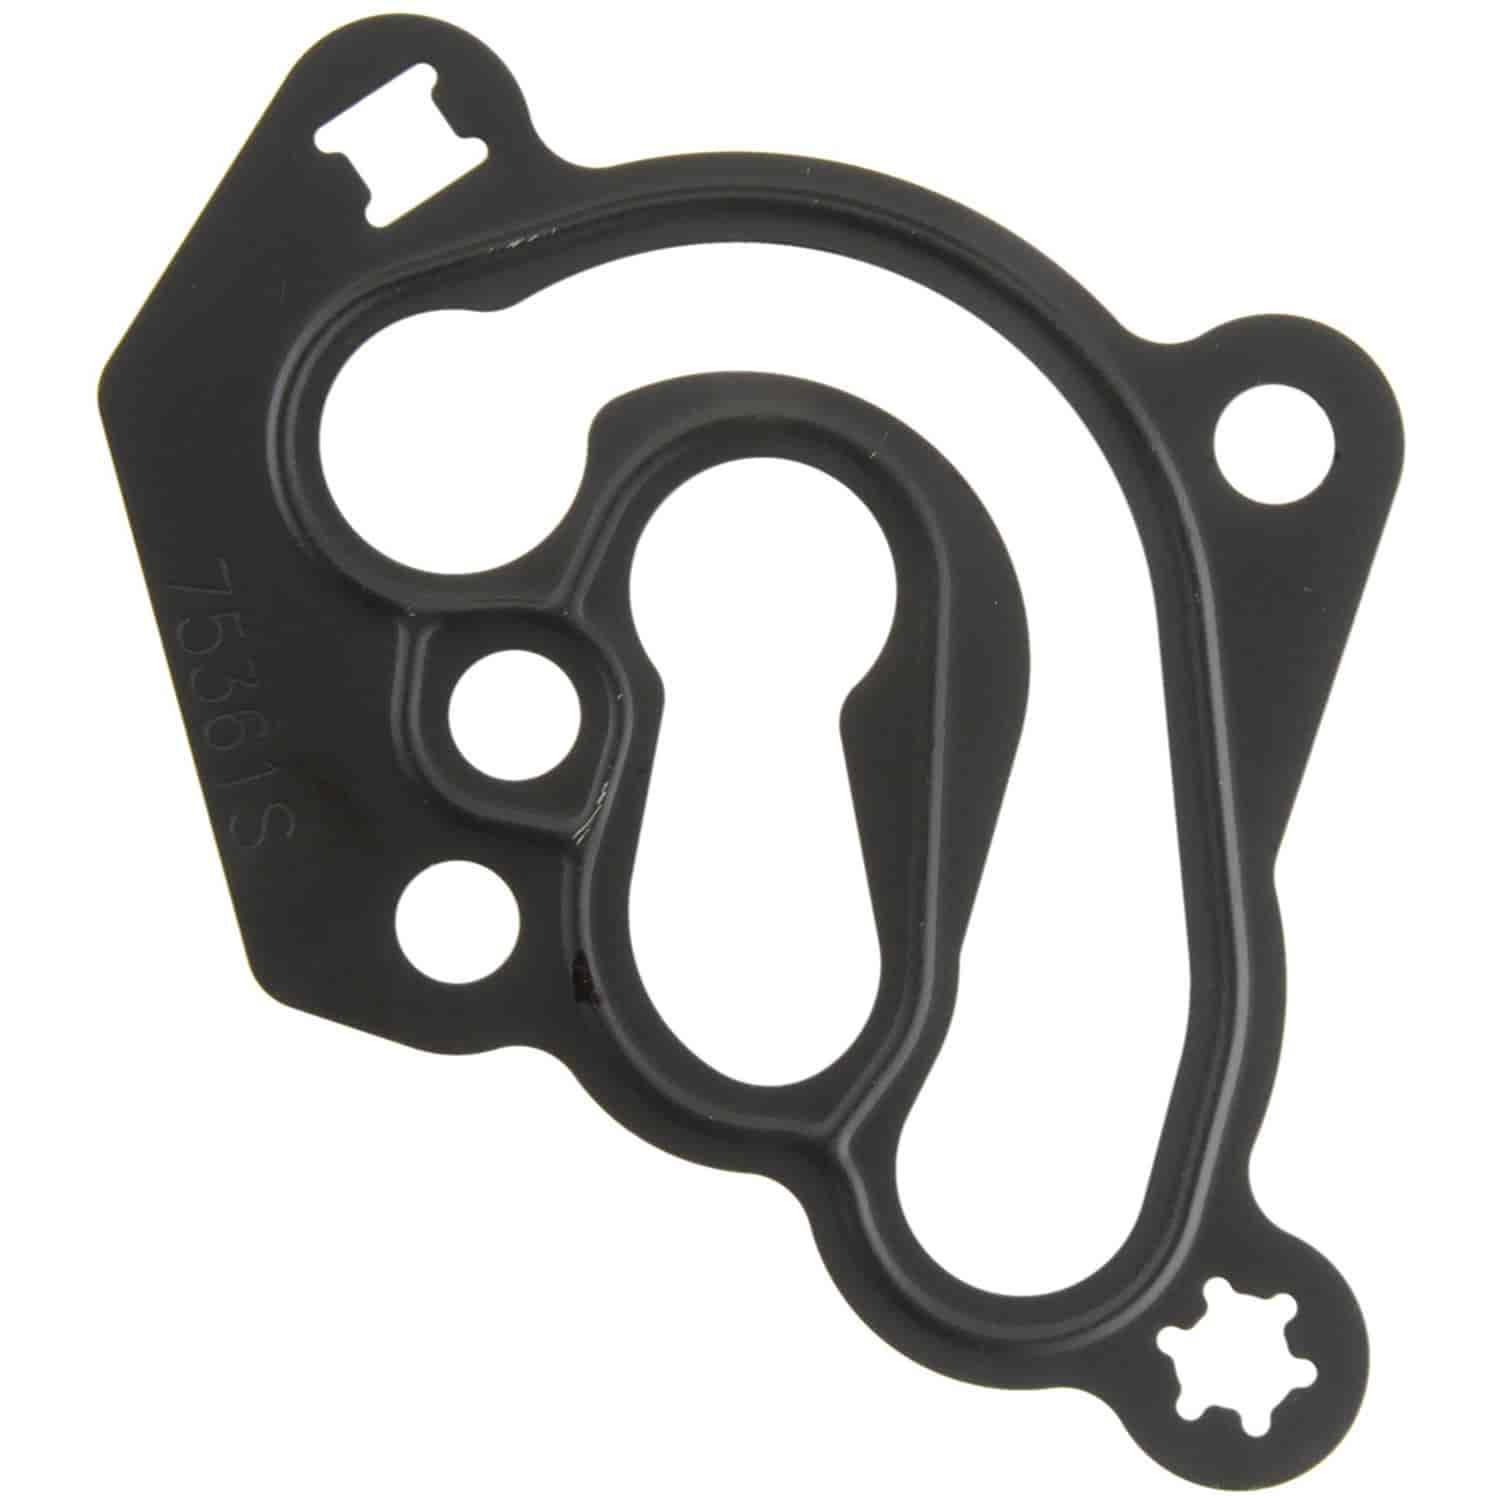 Oil Filter Adapter Gasket GM 3.6L High Feature